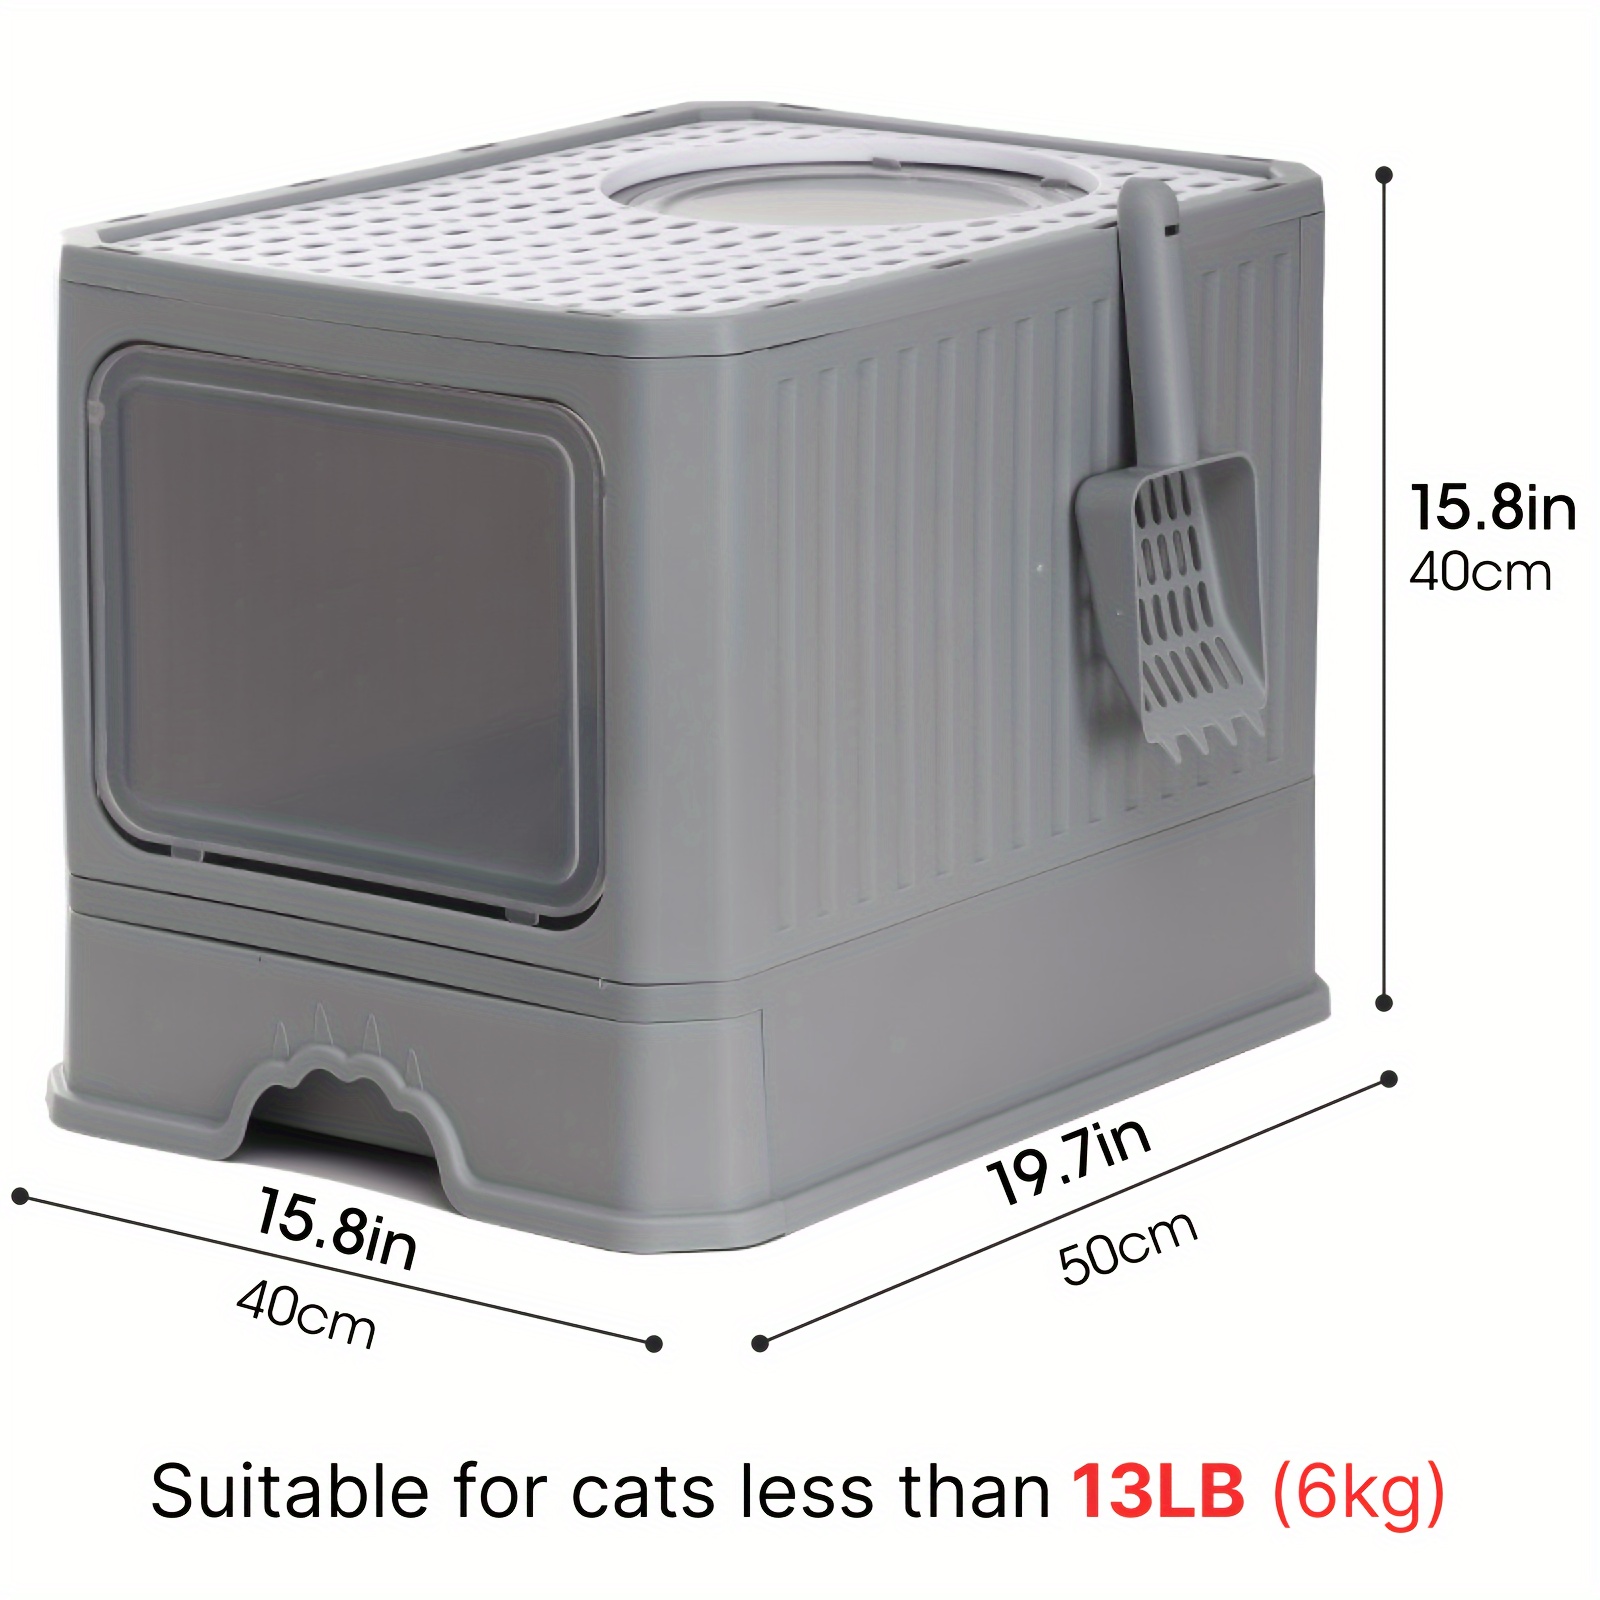 fully enclosed cat litter box with lid foldable anti splashing cat litter drawer with front flap door and toy entry cat toilet for indoor cats